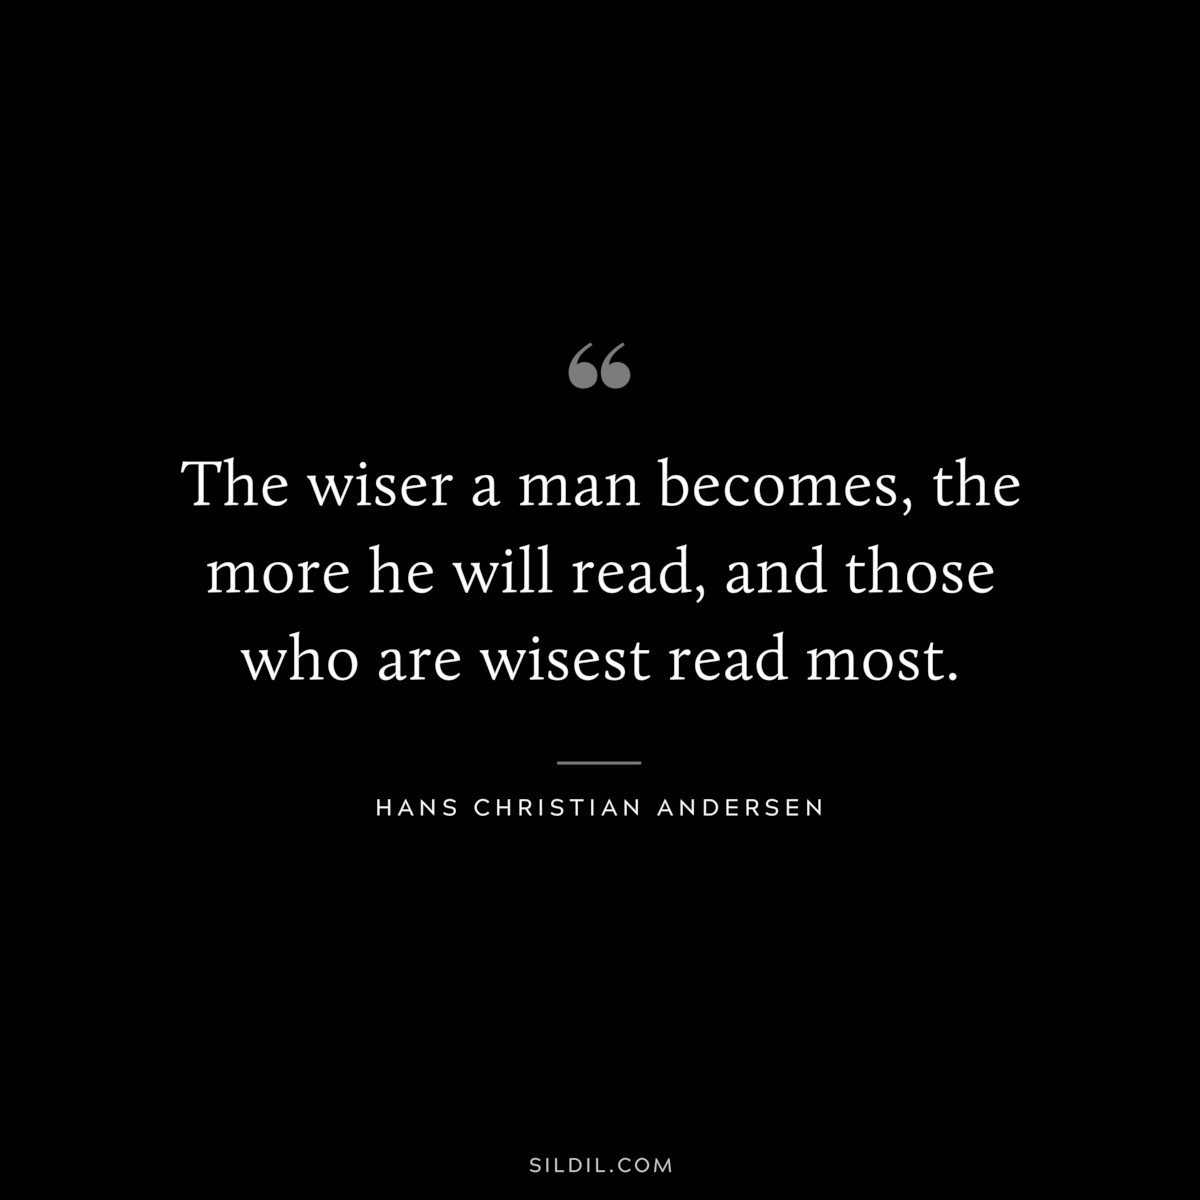 The wiser a man becomes, the more he will read, and those who are wisest read most. ― Hans Christian Andersen